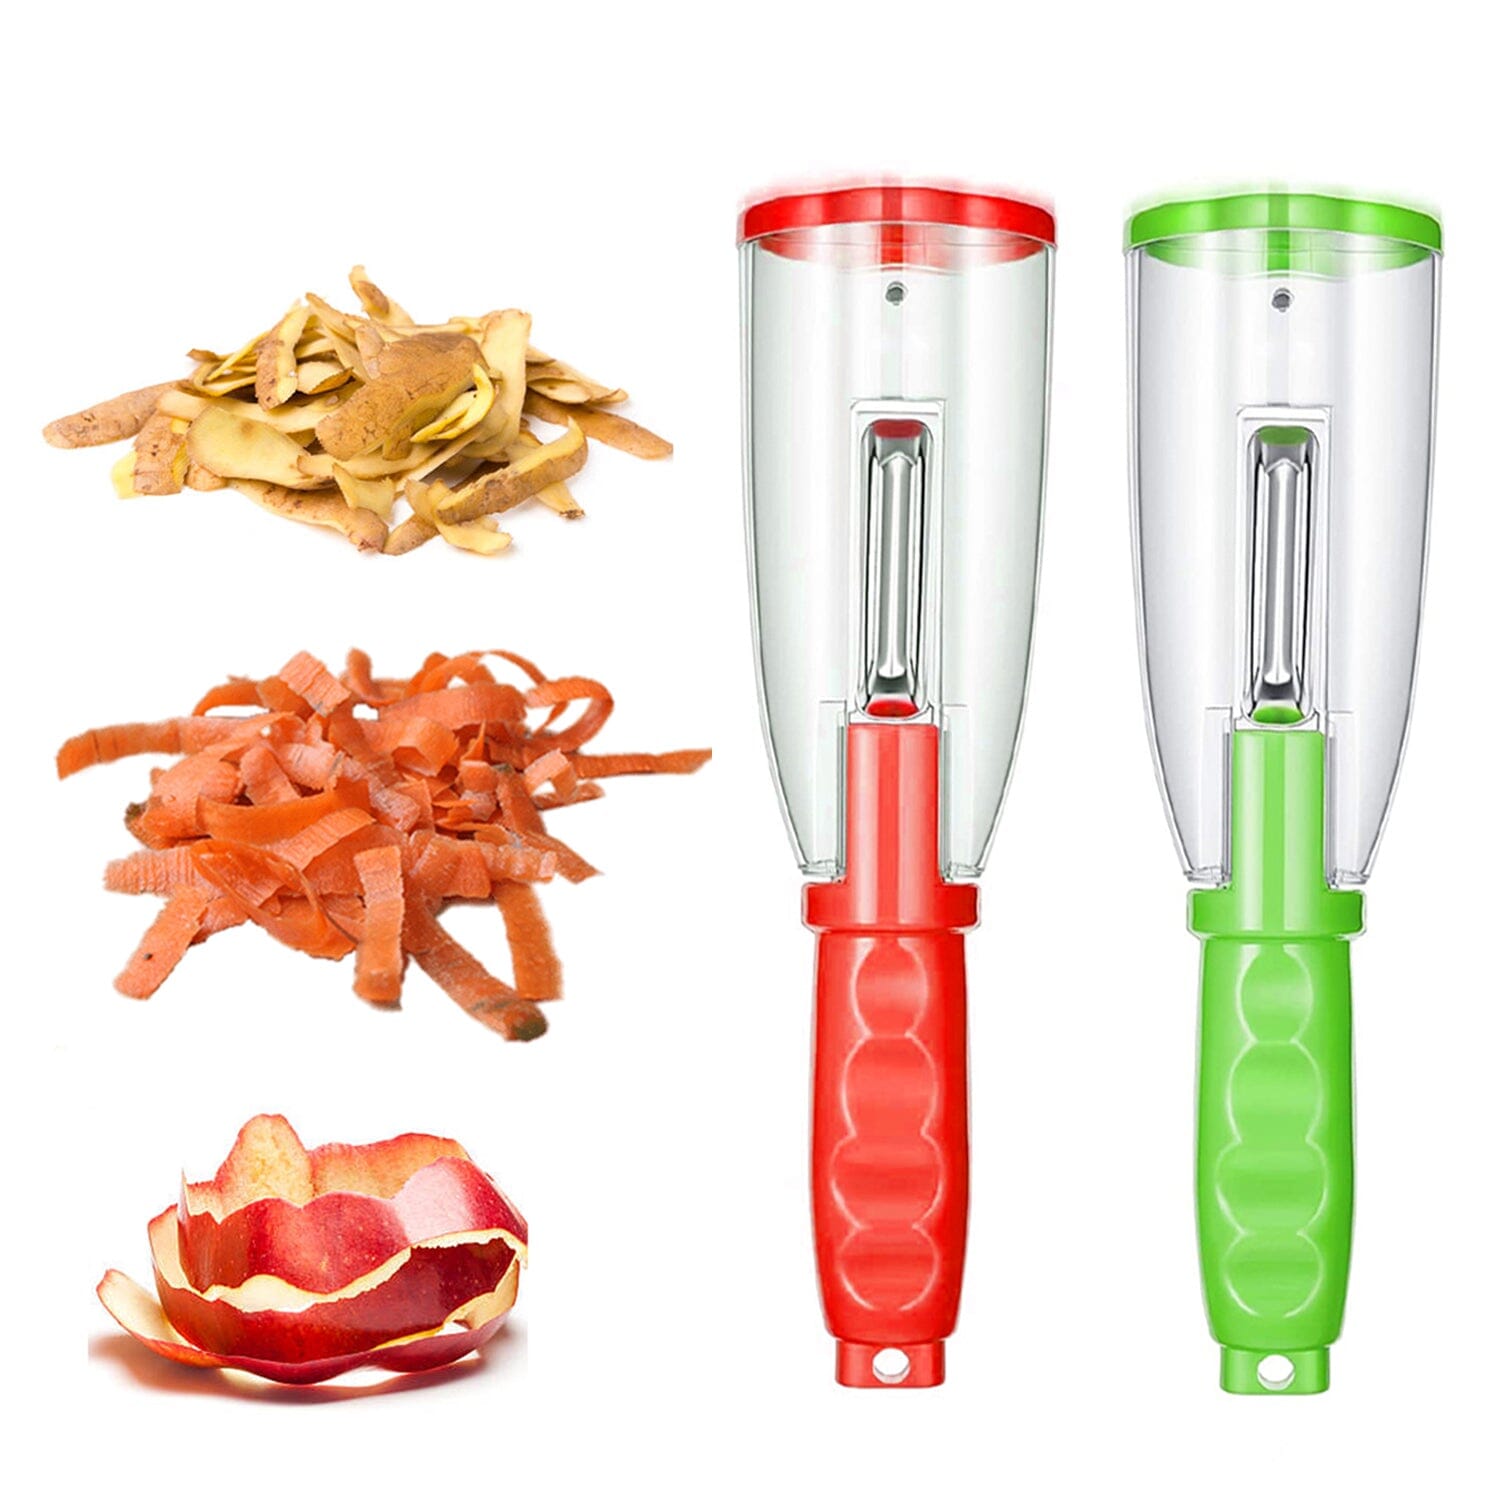 http://dailysale.com/cdn/shop/files/multifunctional-fruit-vegetable-peeler-with-storage-box-tube-kitchen-tools-gadgets-dailysale-427761.jpg?v=1698352242